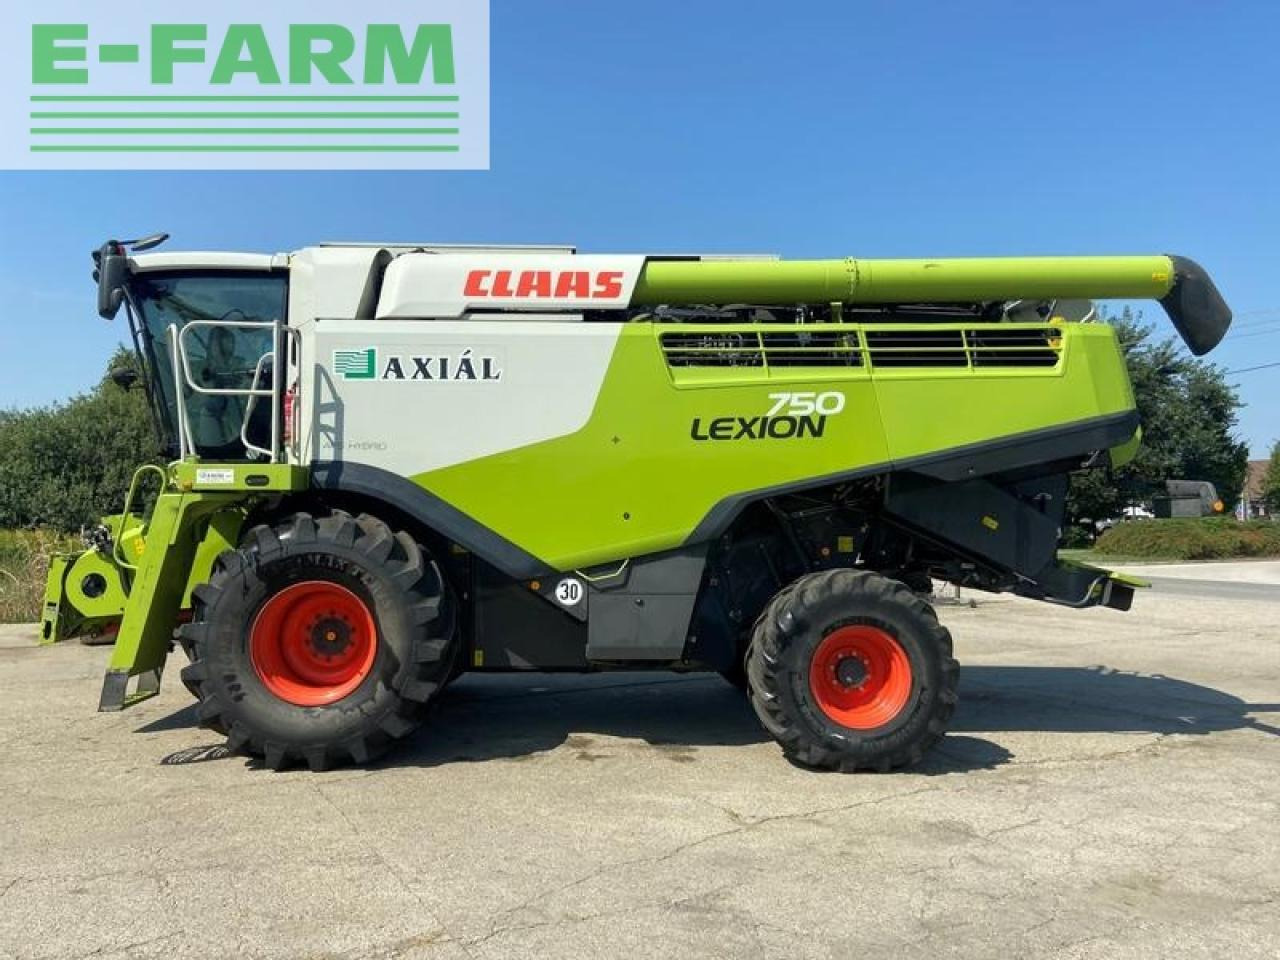 Combine harvester CLAAS lexion 750: picture 7